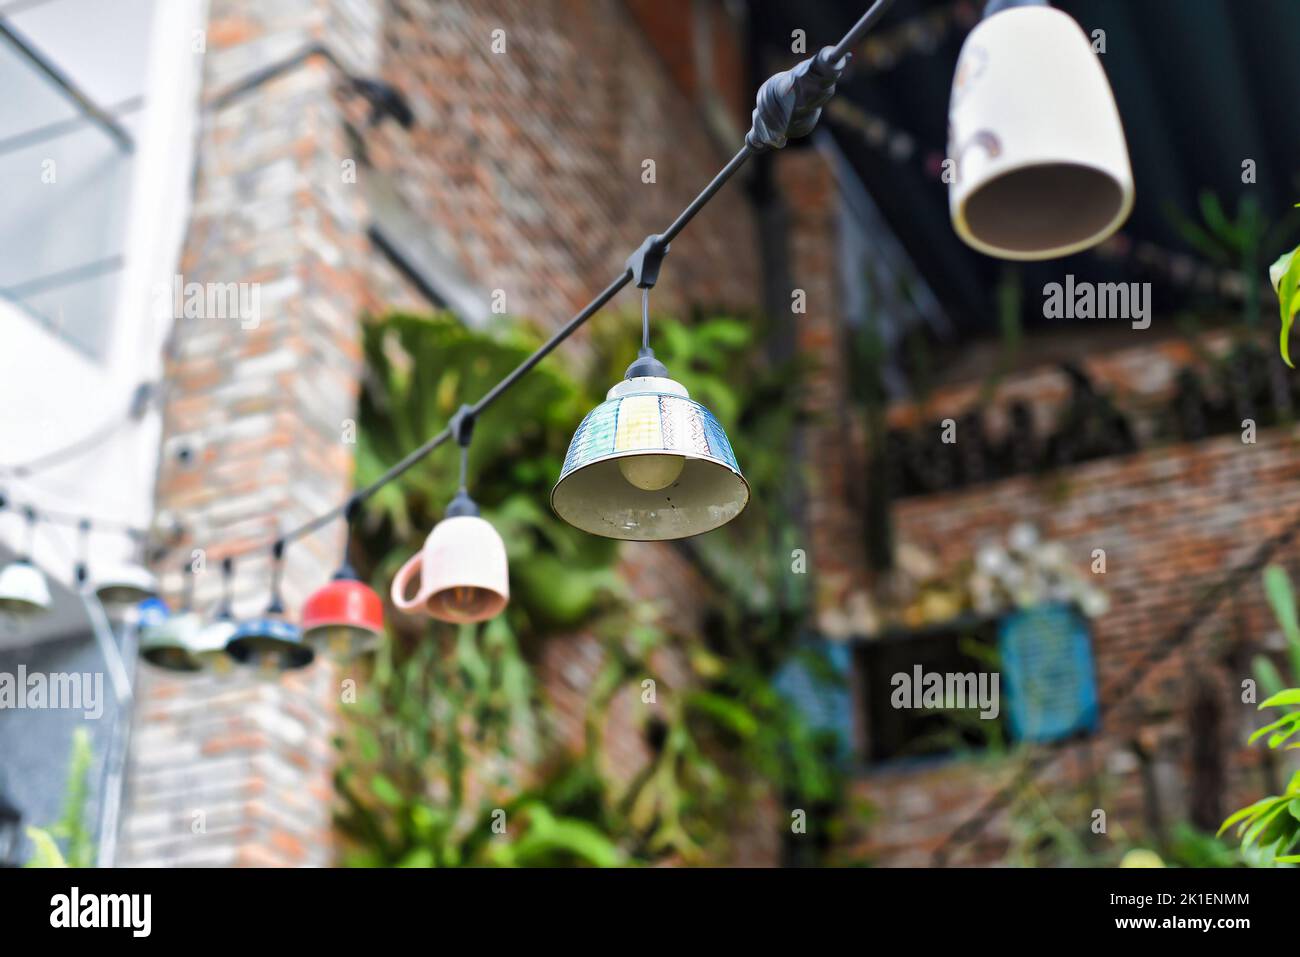 Creative design for garden: many old glass dishes with lights garland Stock Photo